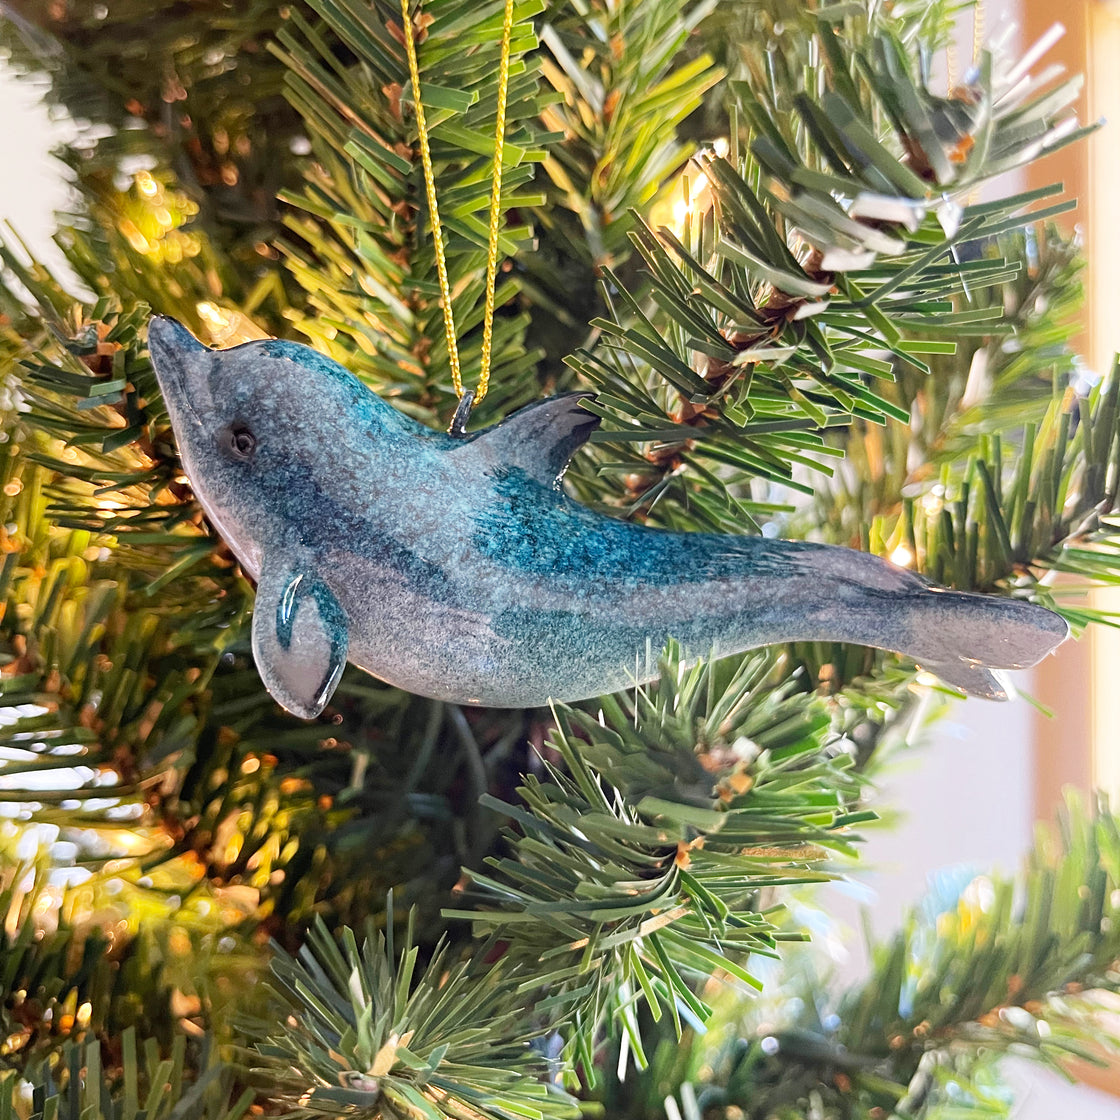 Delicate hand-painted rengora blue dolphin ornament hanging gracefully from a Christmas tree branch